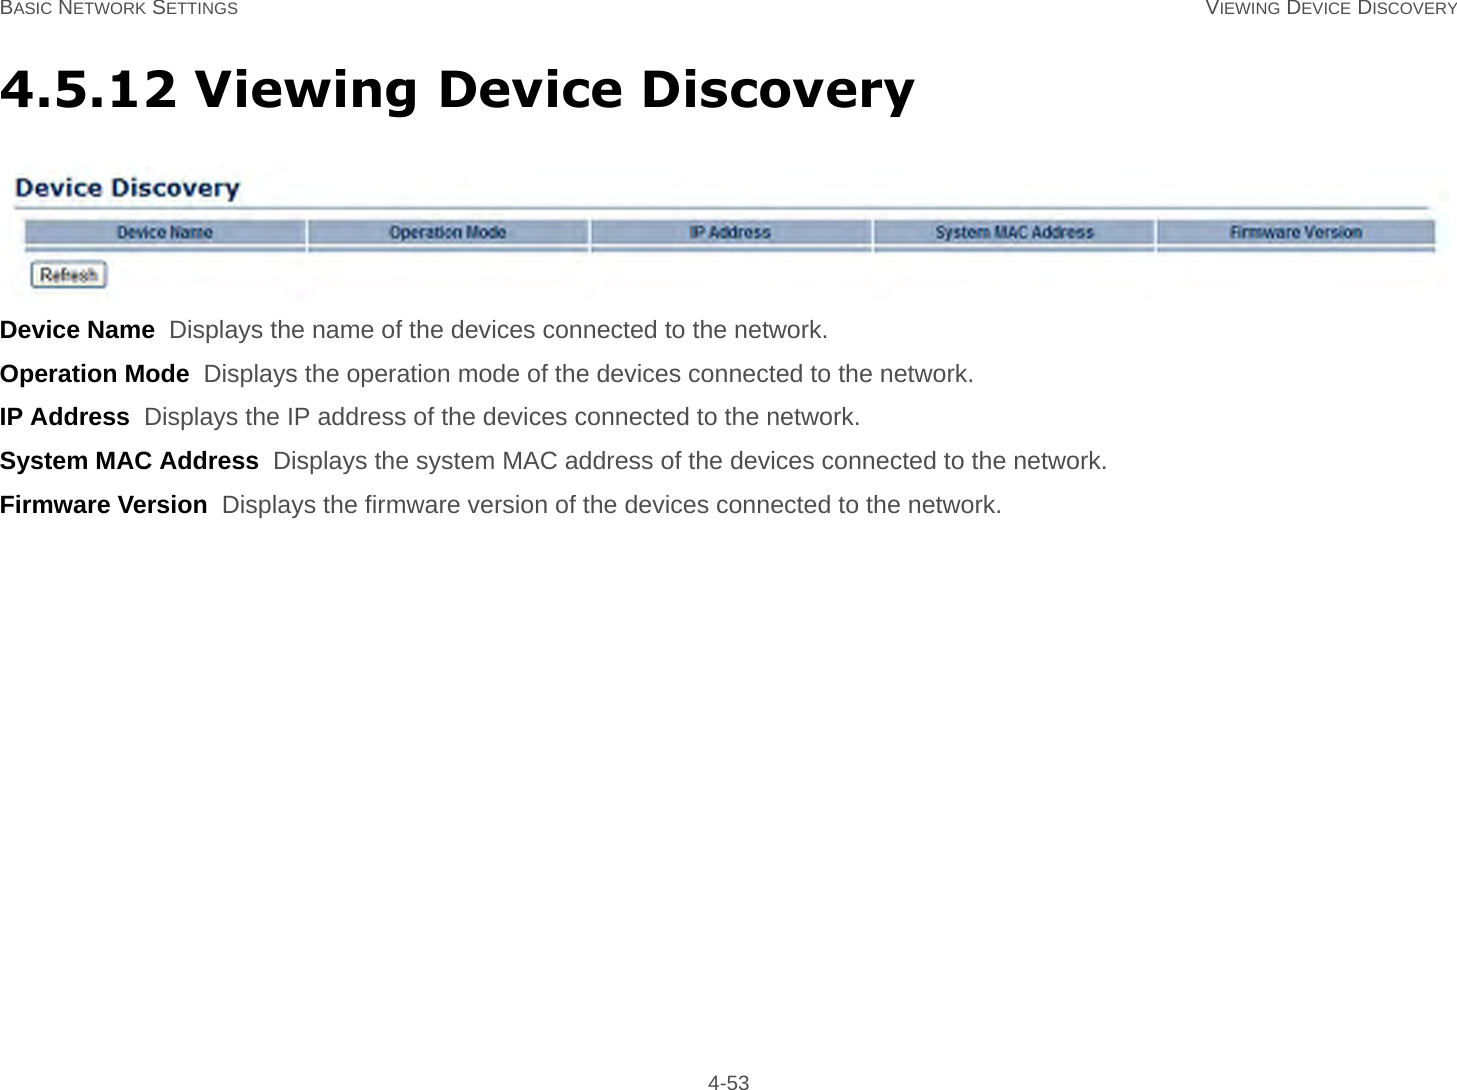 BASIC NETWORK SETTINGS VIEWING DEVICE DISCOVERY 4-534.5.12 Viewing Device DiscoveryDevice Name  Displays the name of the devices connected to the network.Operation Mode  Displays the operation mode of the devices connected to the network.IP Address  Displays the IP address of the devices connected to the network.System MAC Address  Displays the system MAC address of the devices connected to the network.Firmware Version  Displays the firmware version of the devices connected to the network.